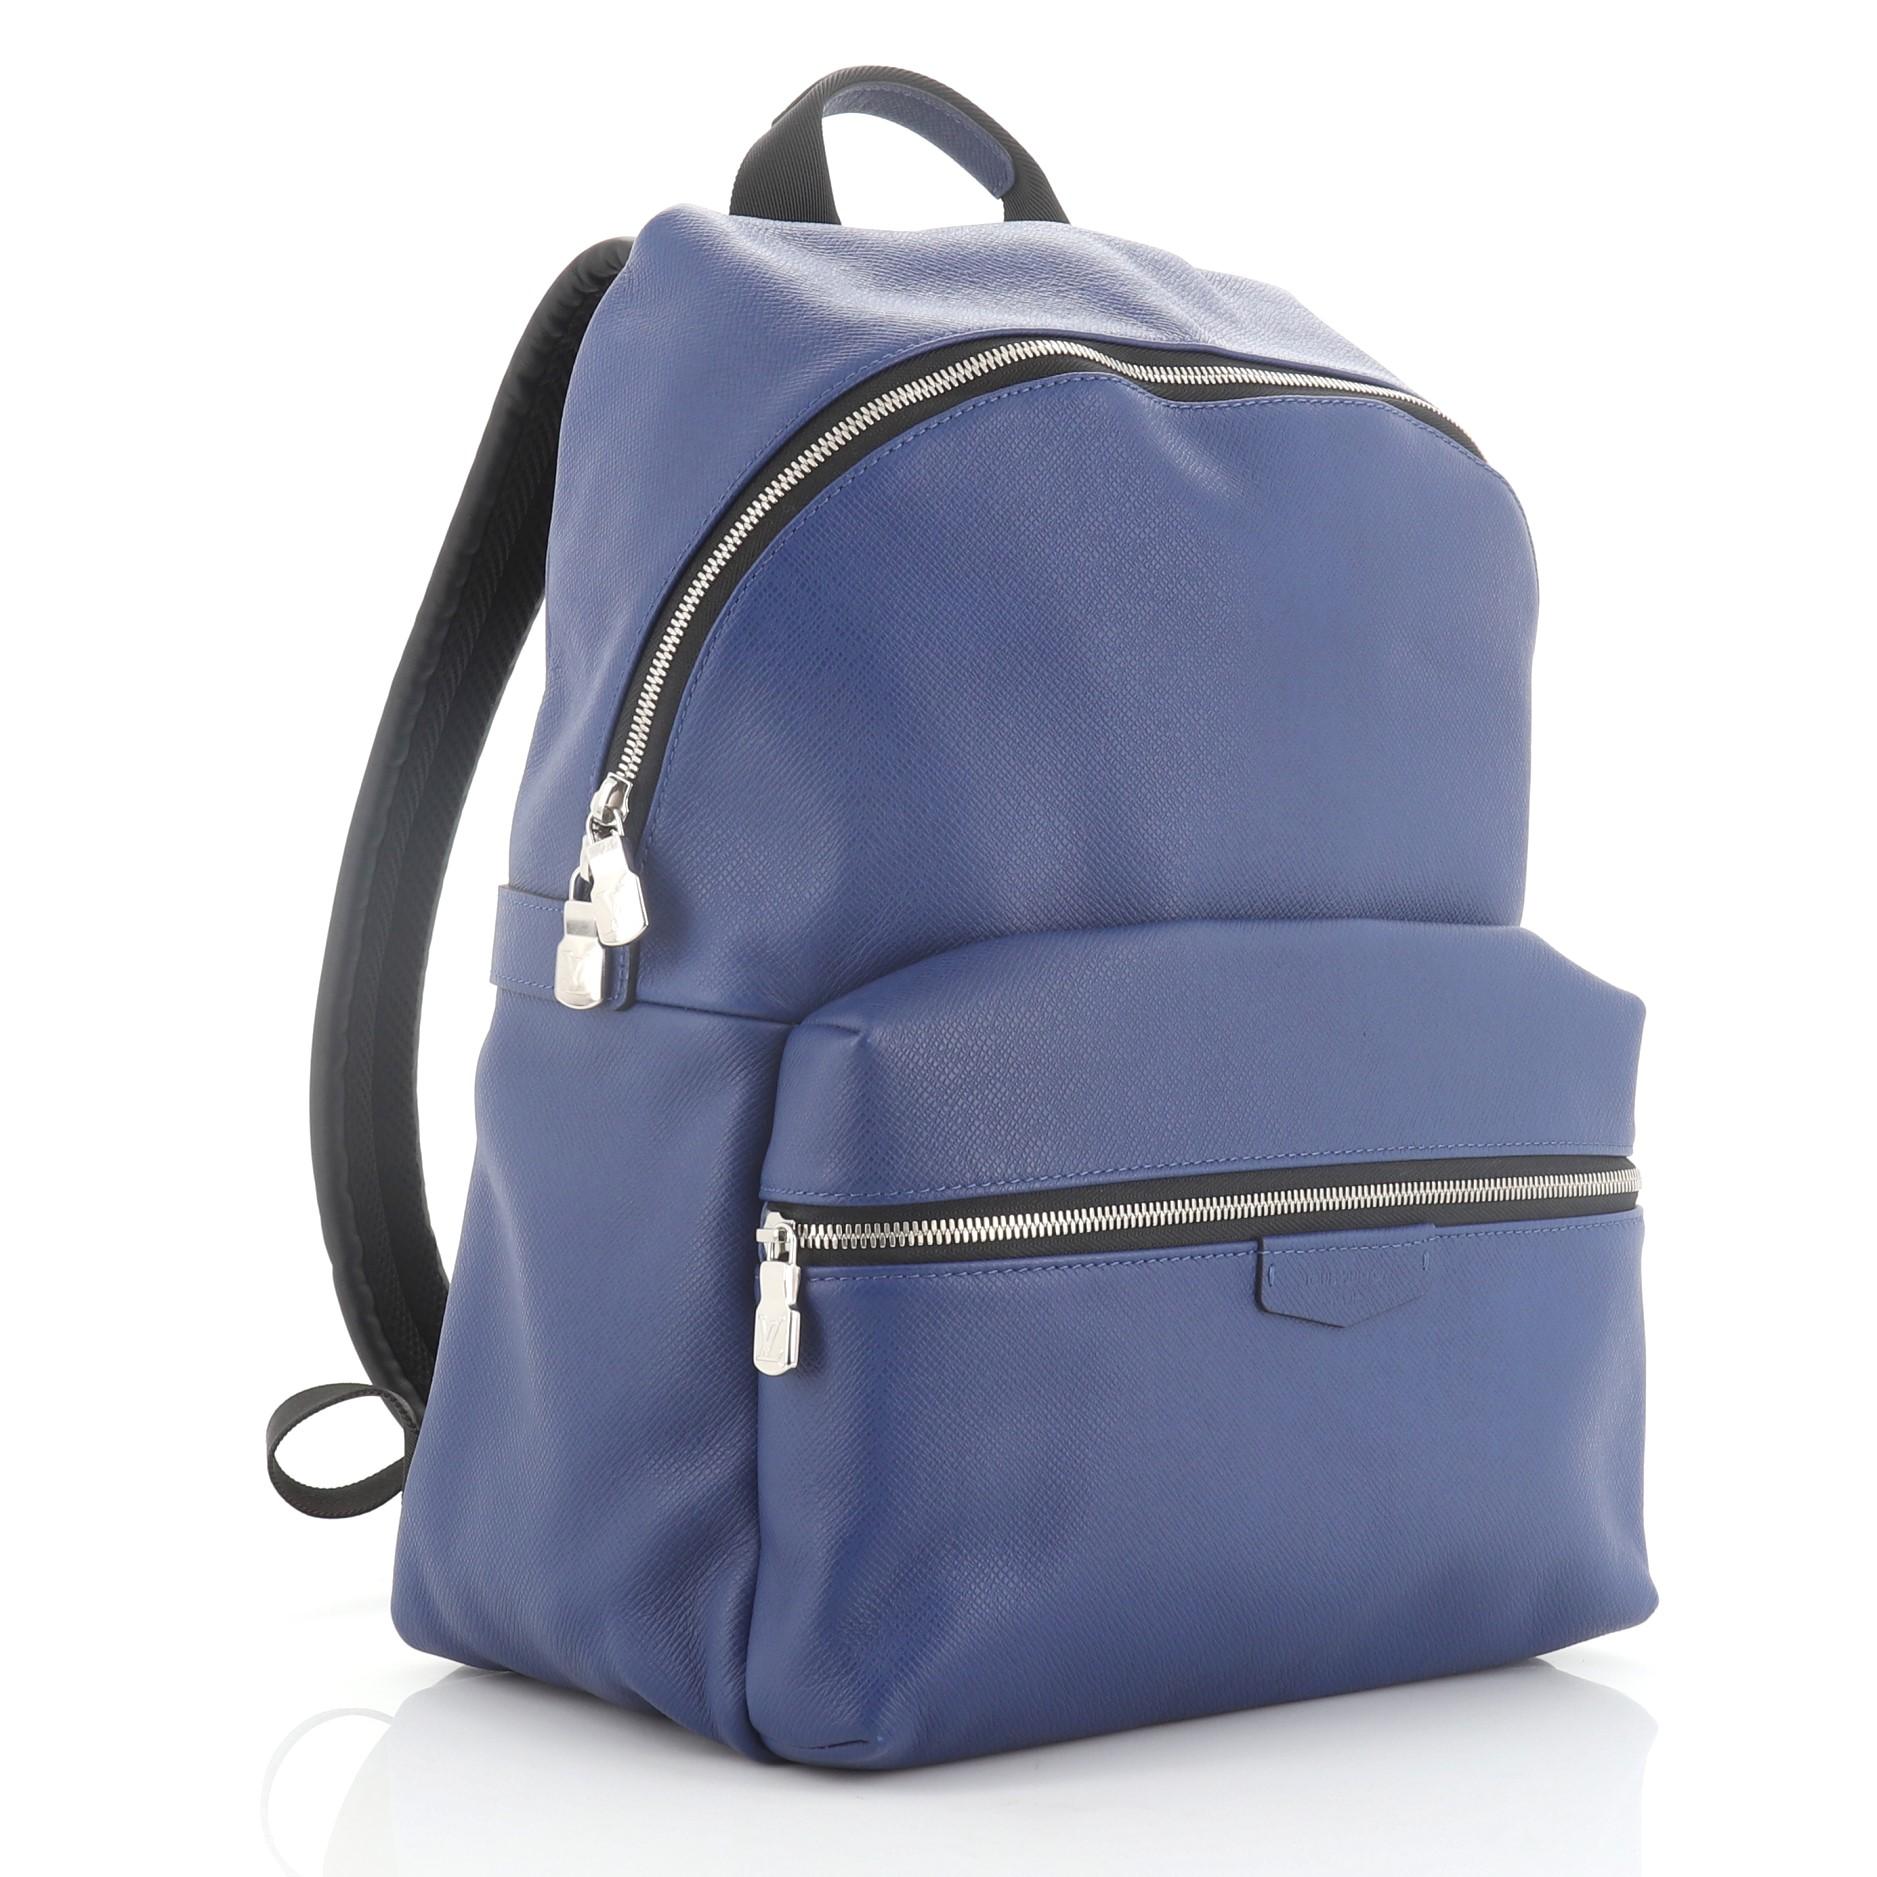 This Louis Vuitton Discovery Backpack Taiga Leather PM, crafted in blue Taiga leather, features adjustable shoulder straps, exterior front zip pocket and silver-tone hardware. Its zip closure opens to a black fabric interior with slip pockets.